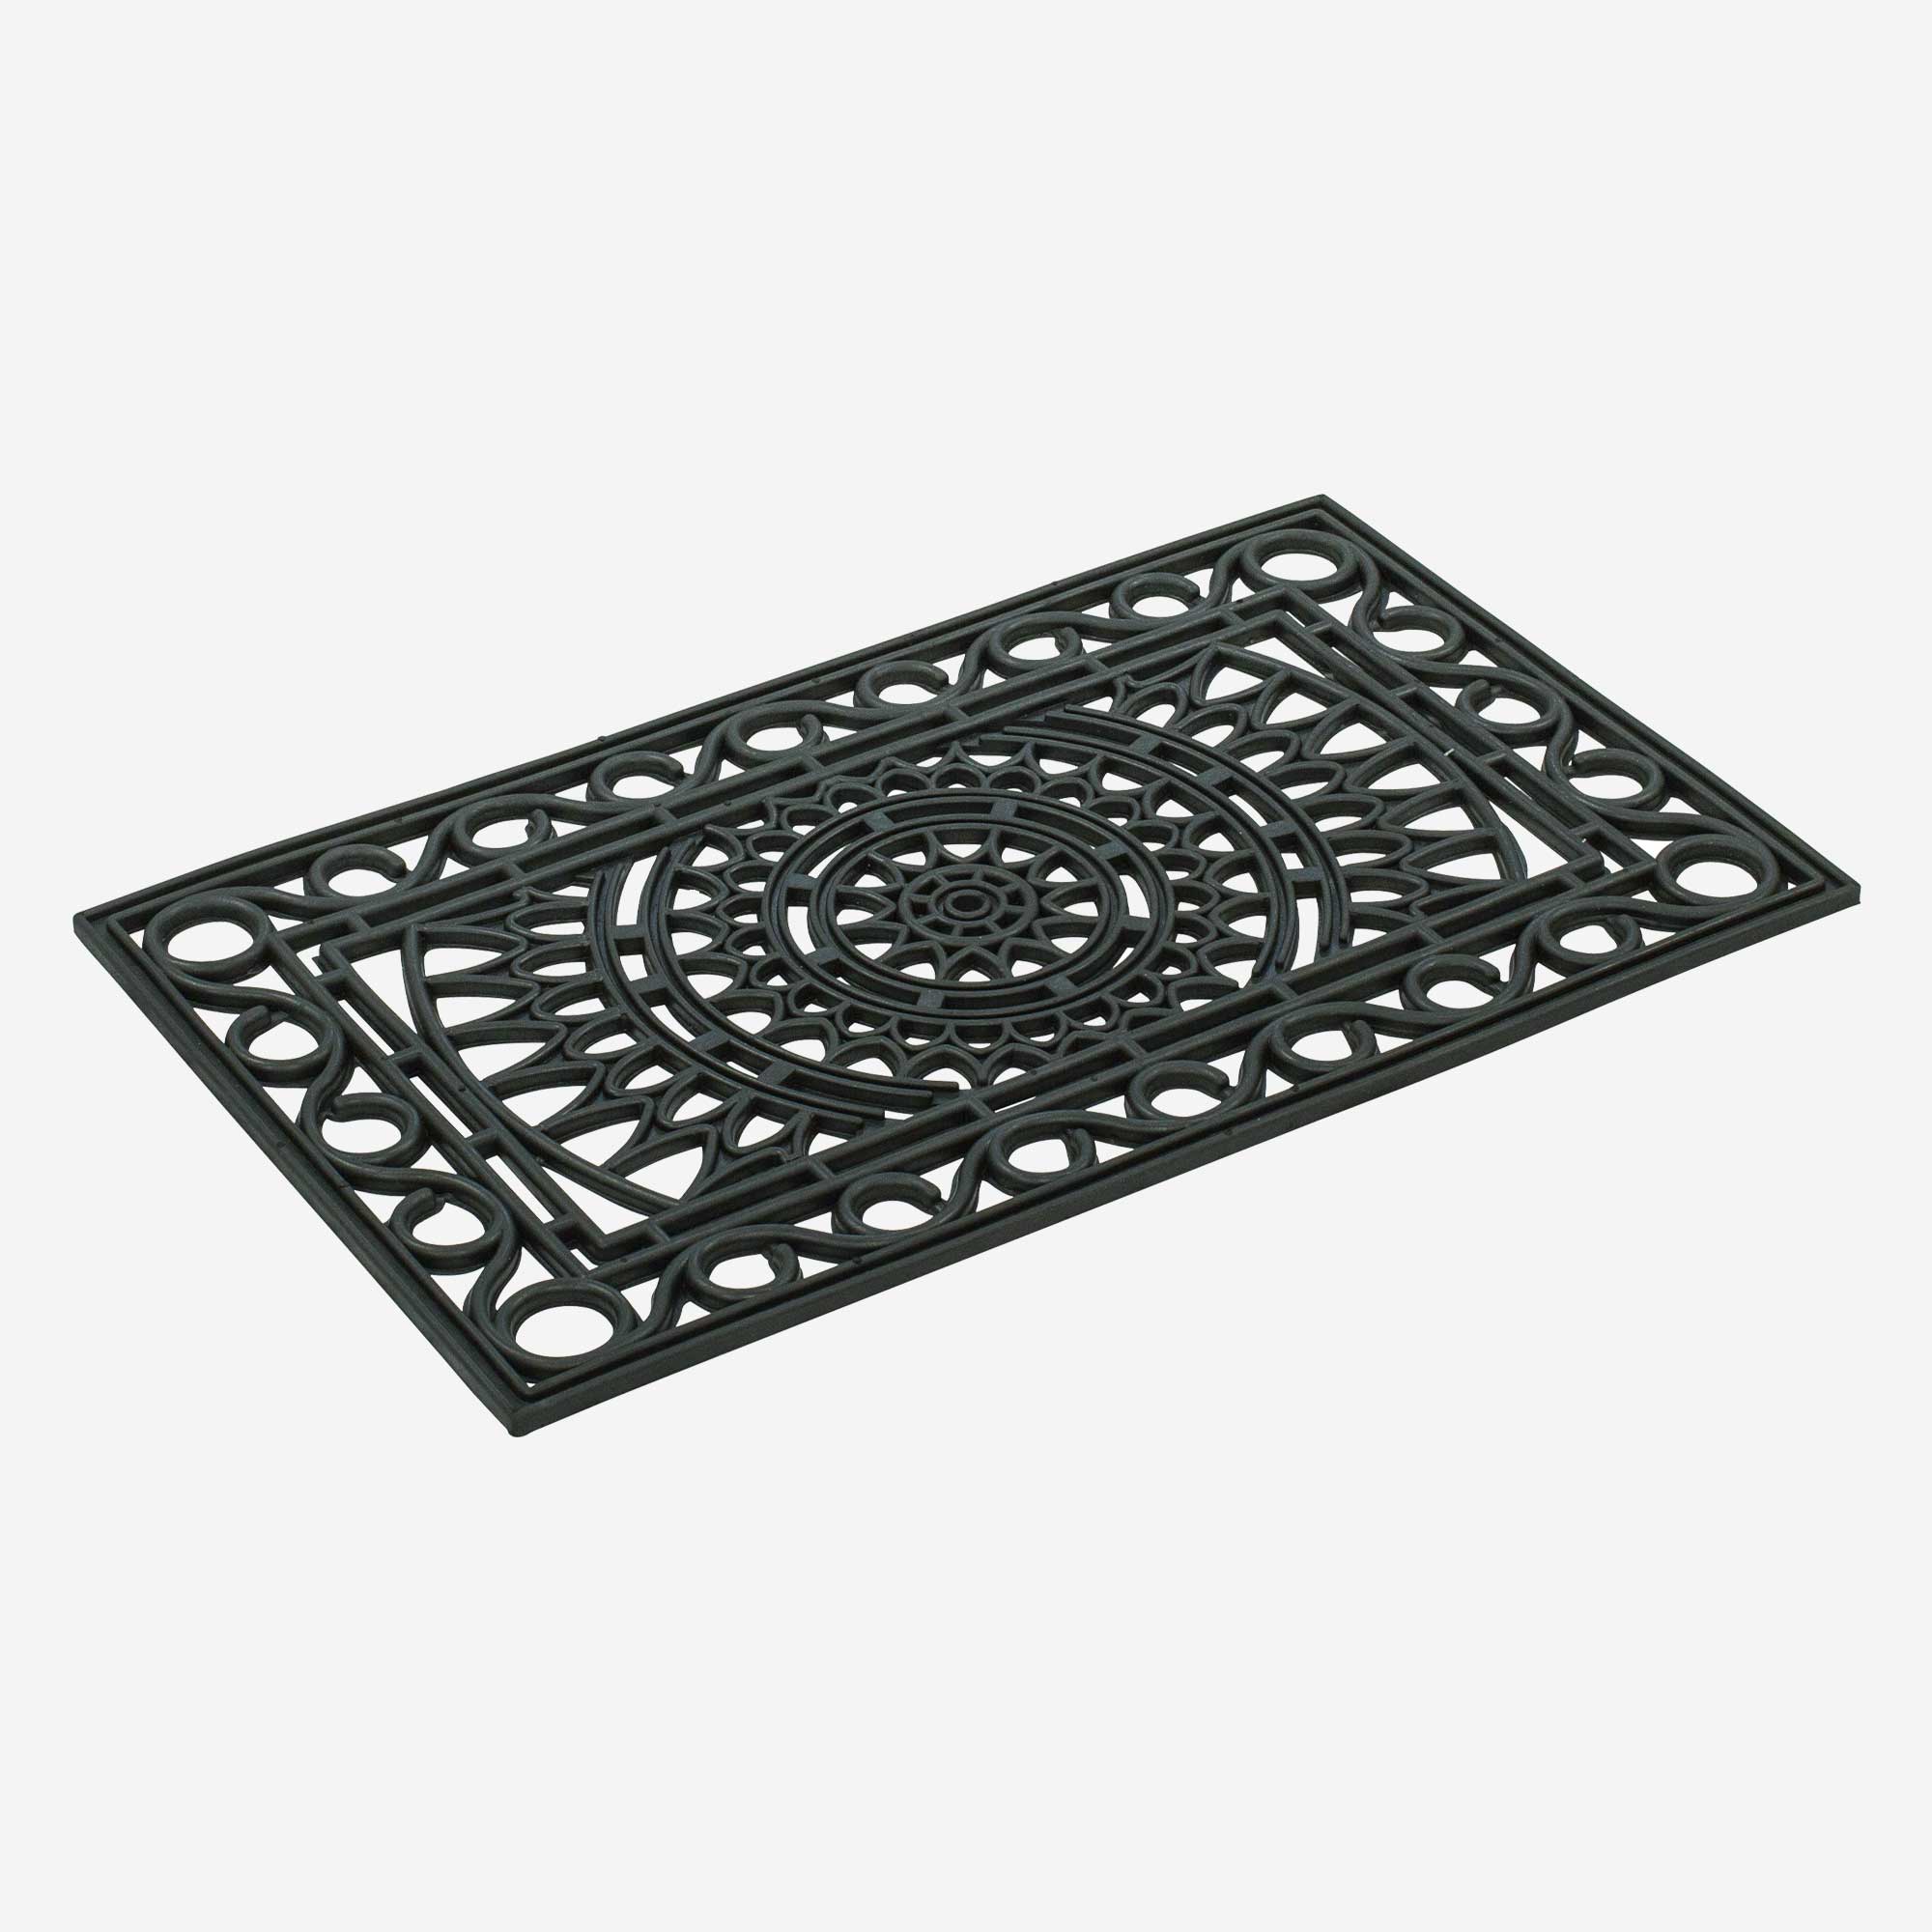 KleenTred Tuscany Rubber Scroll Door Mat 75x45cm